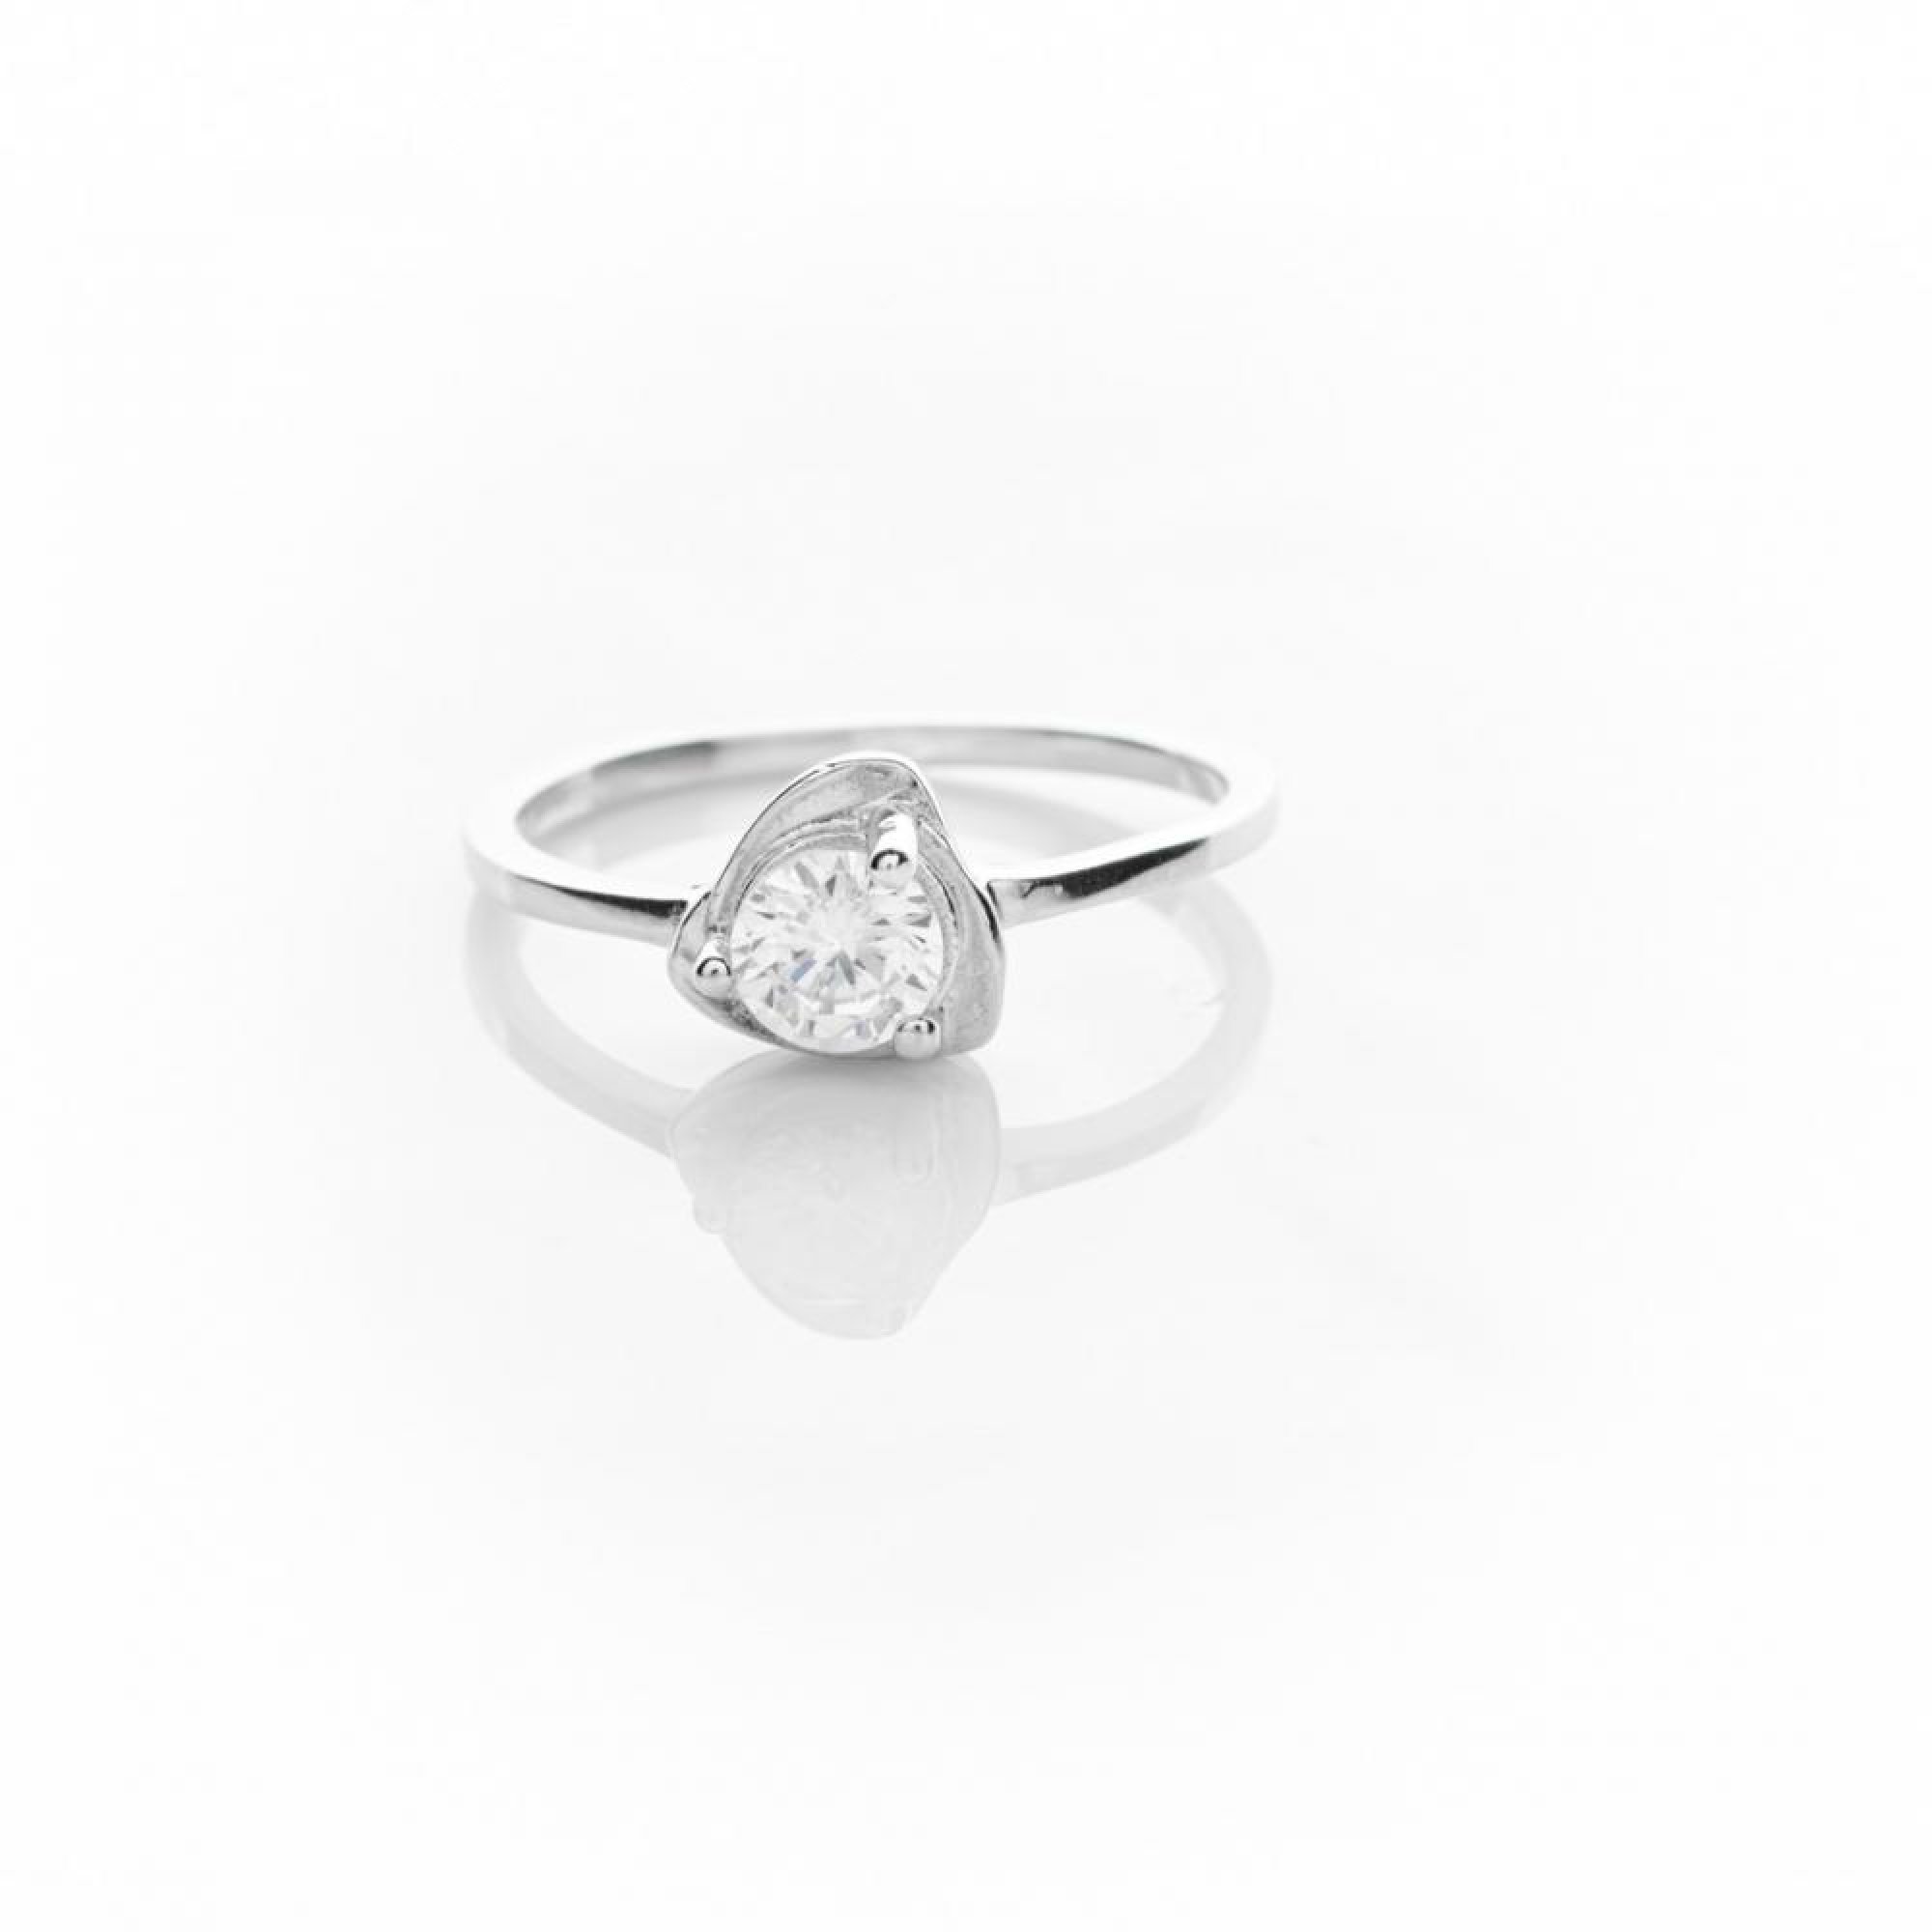 Silver ring with zircon stone